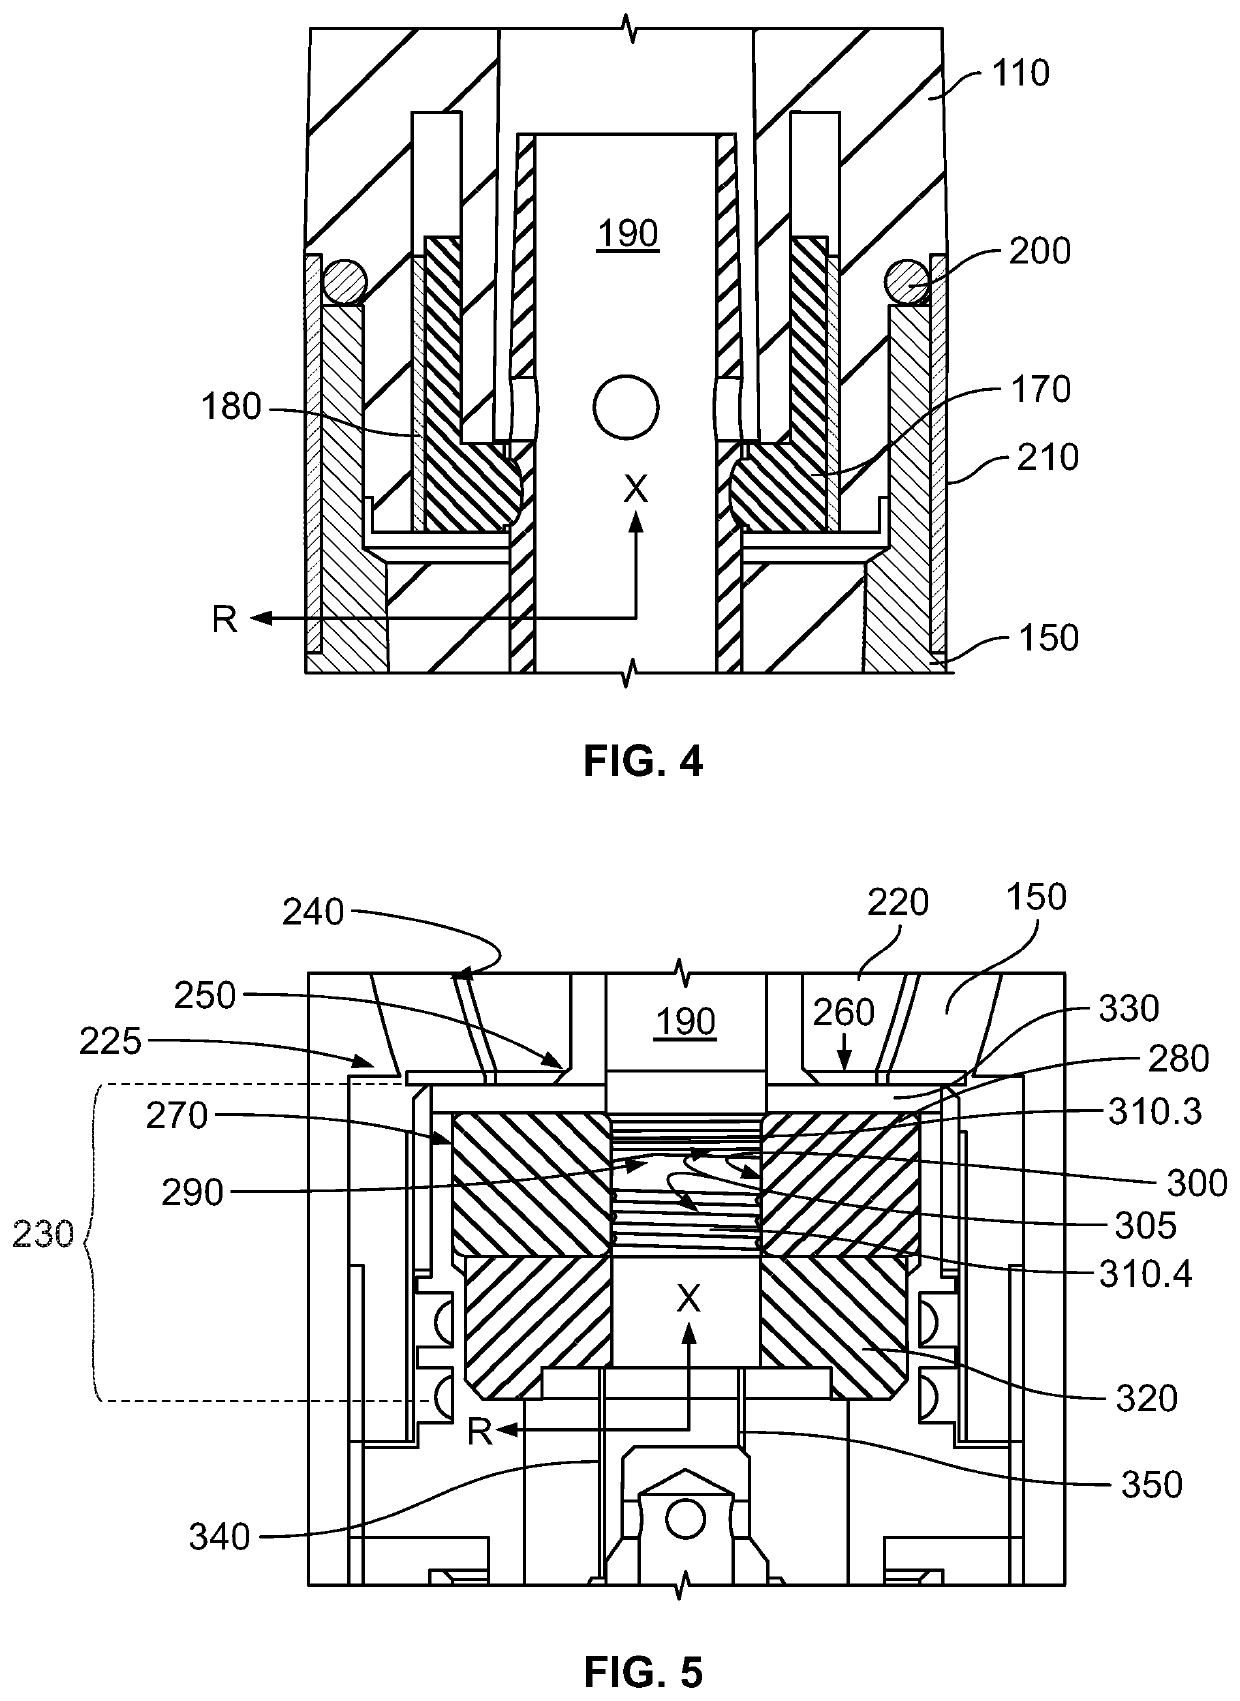 Vaporization device having a wick and coil assembly